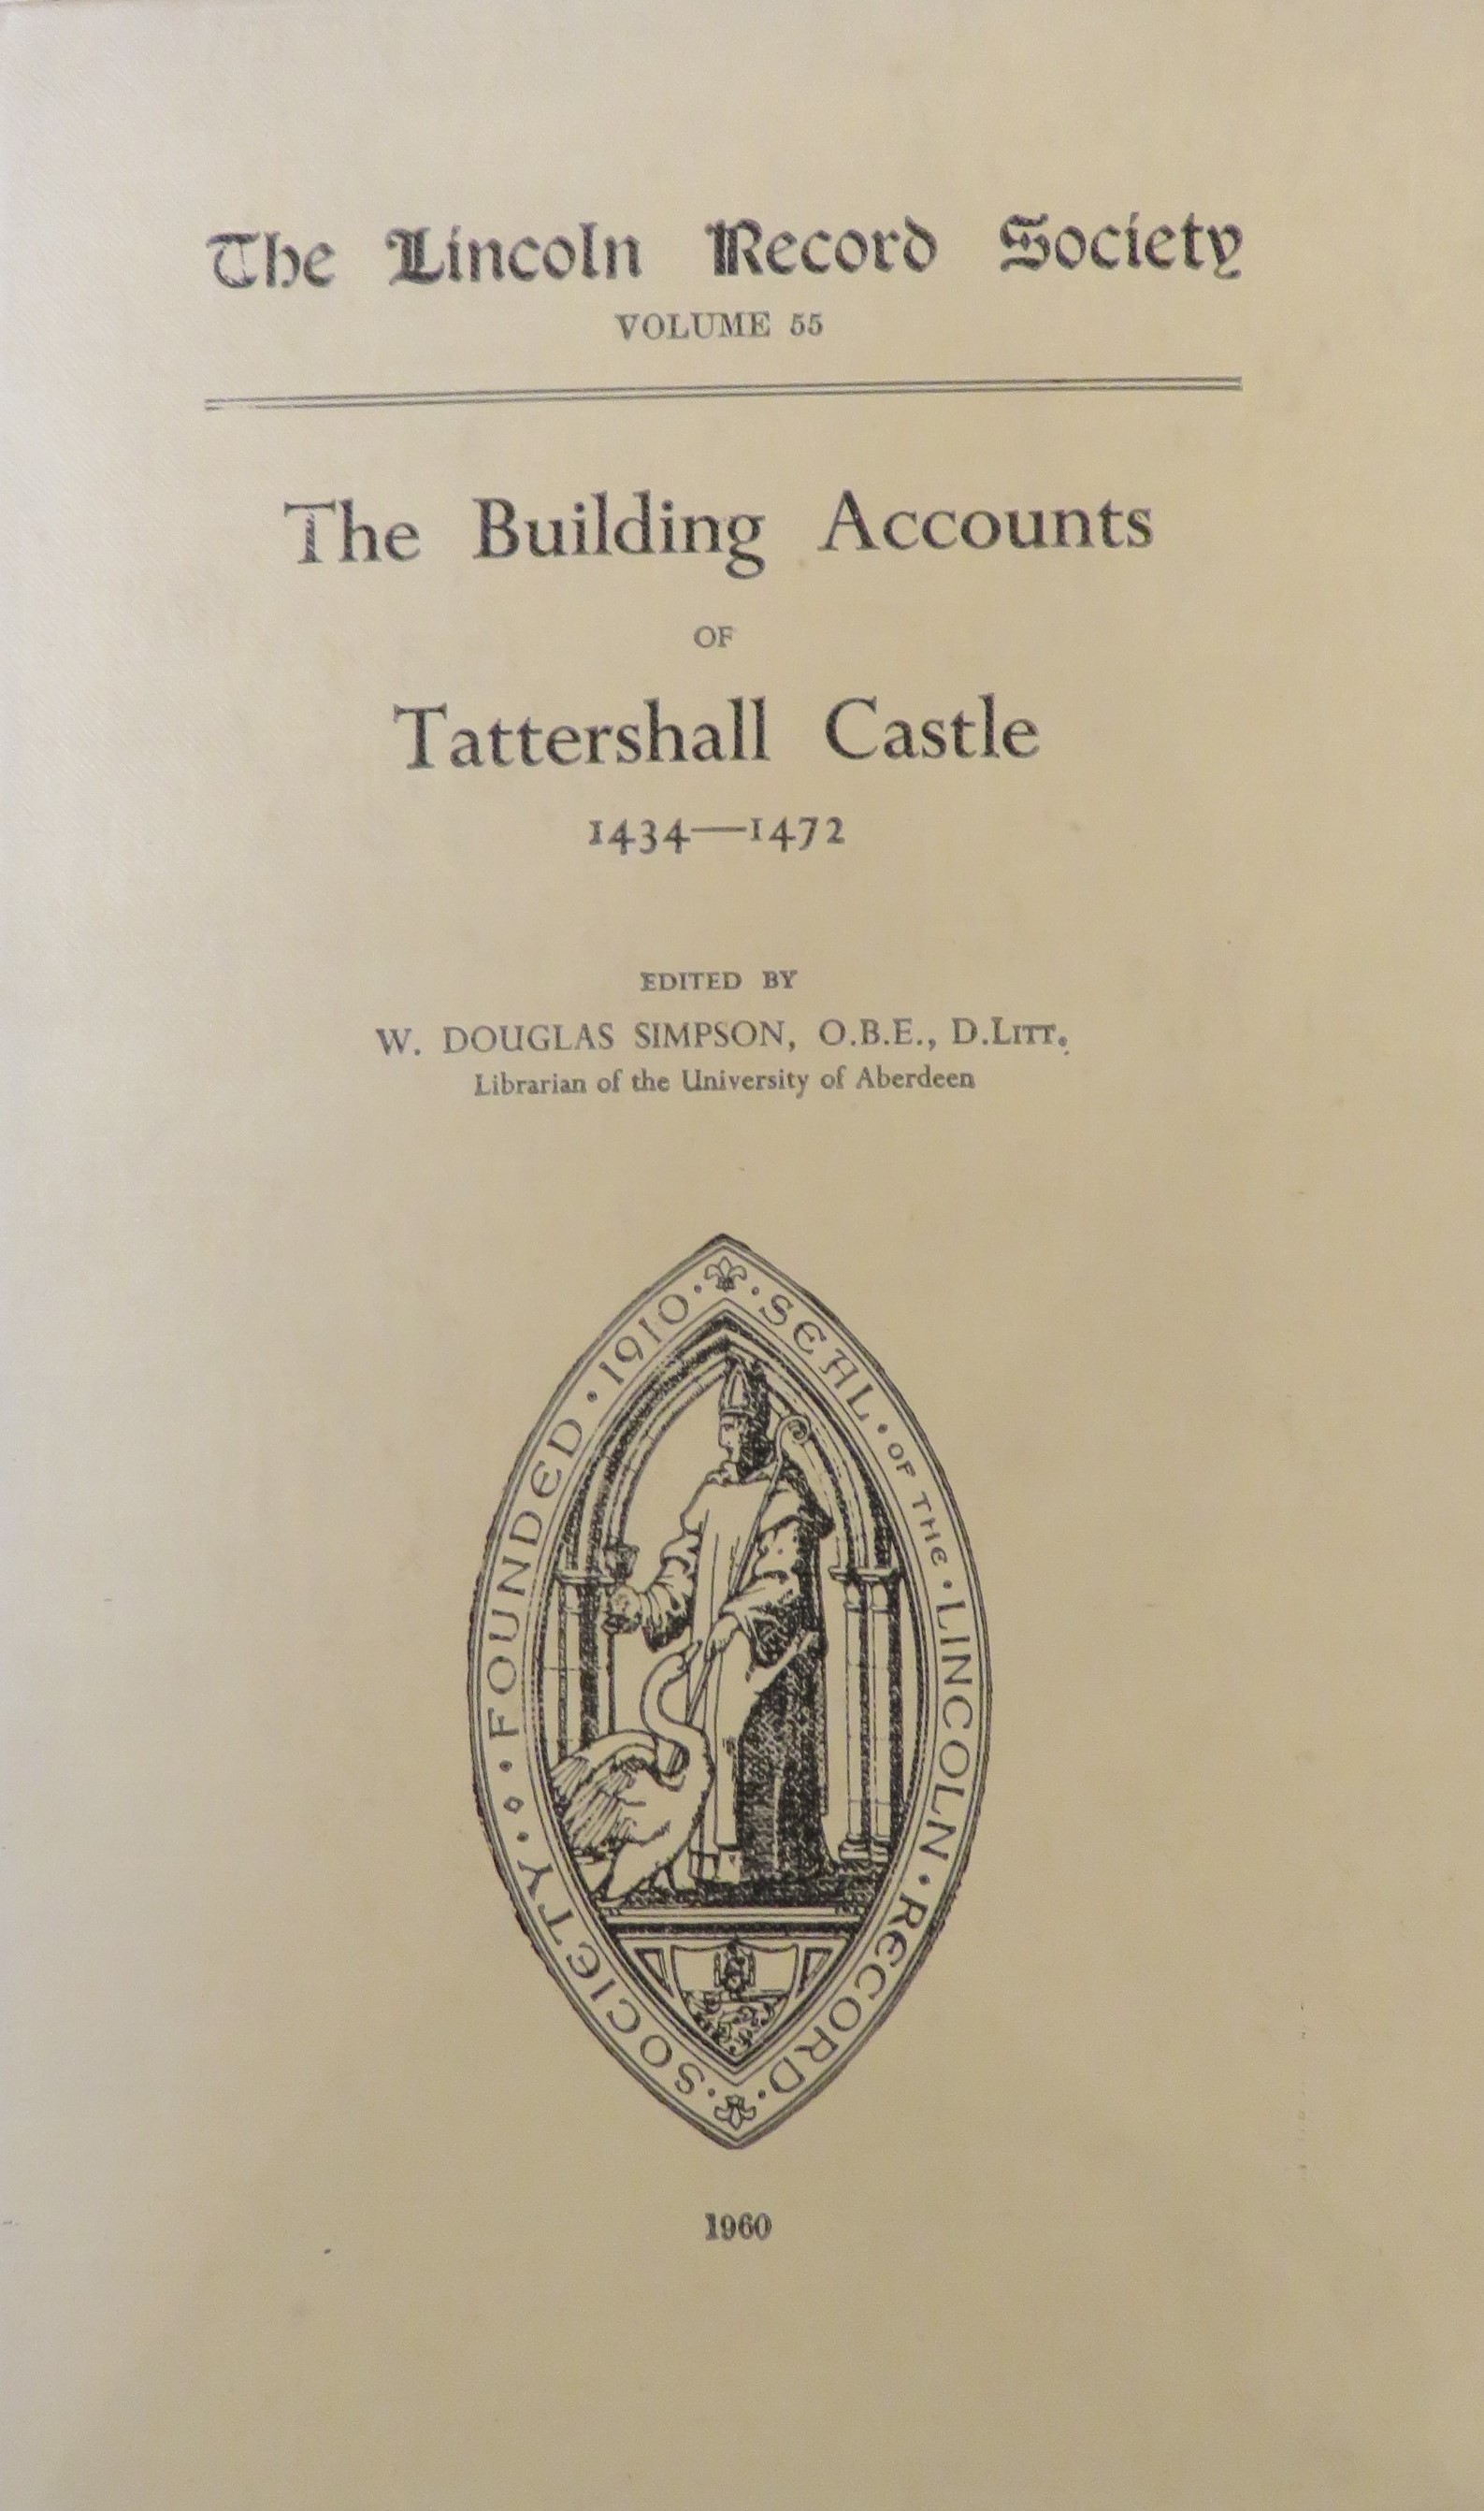 The Lincoln Record Society: Volume 55: The Building Accounts of Tattershall Castle 1434-1472